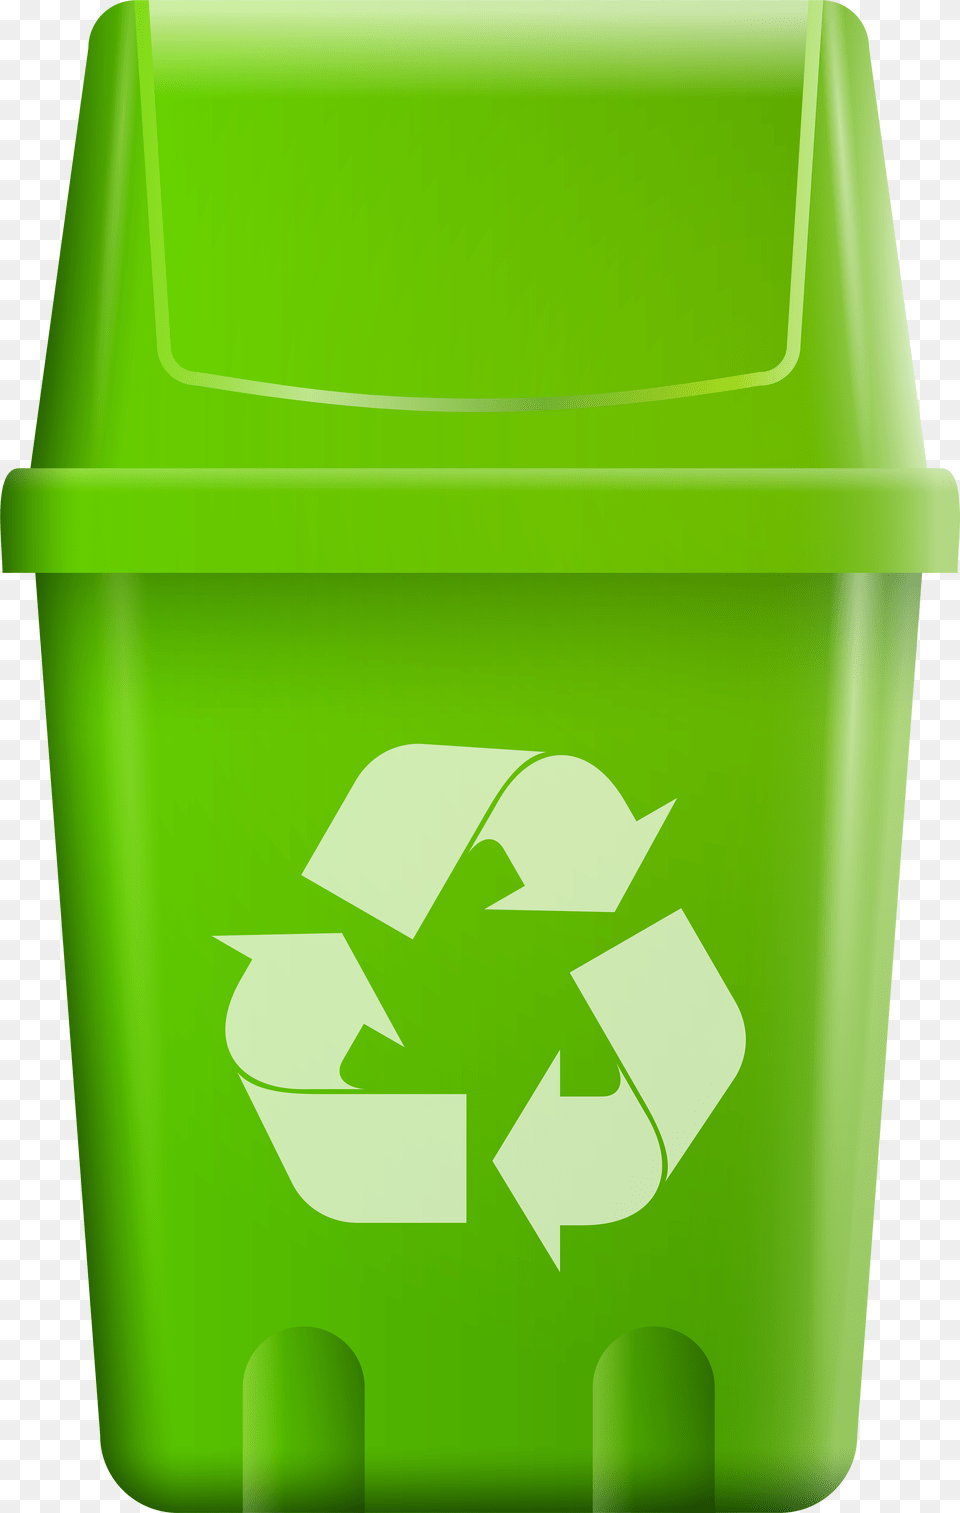 Trash Bin With Recycle Symbol Clip Art Trash Can With Recycling Symbol, Recycling Symbol, Bottle, Shaker Free Png Download